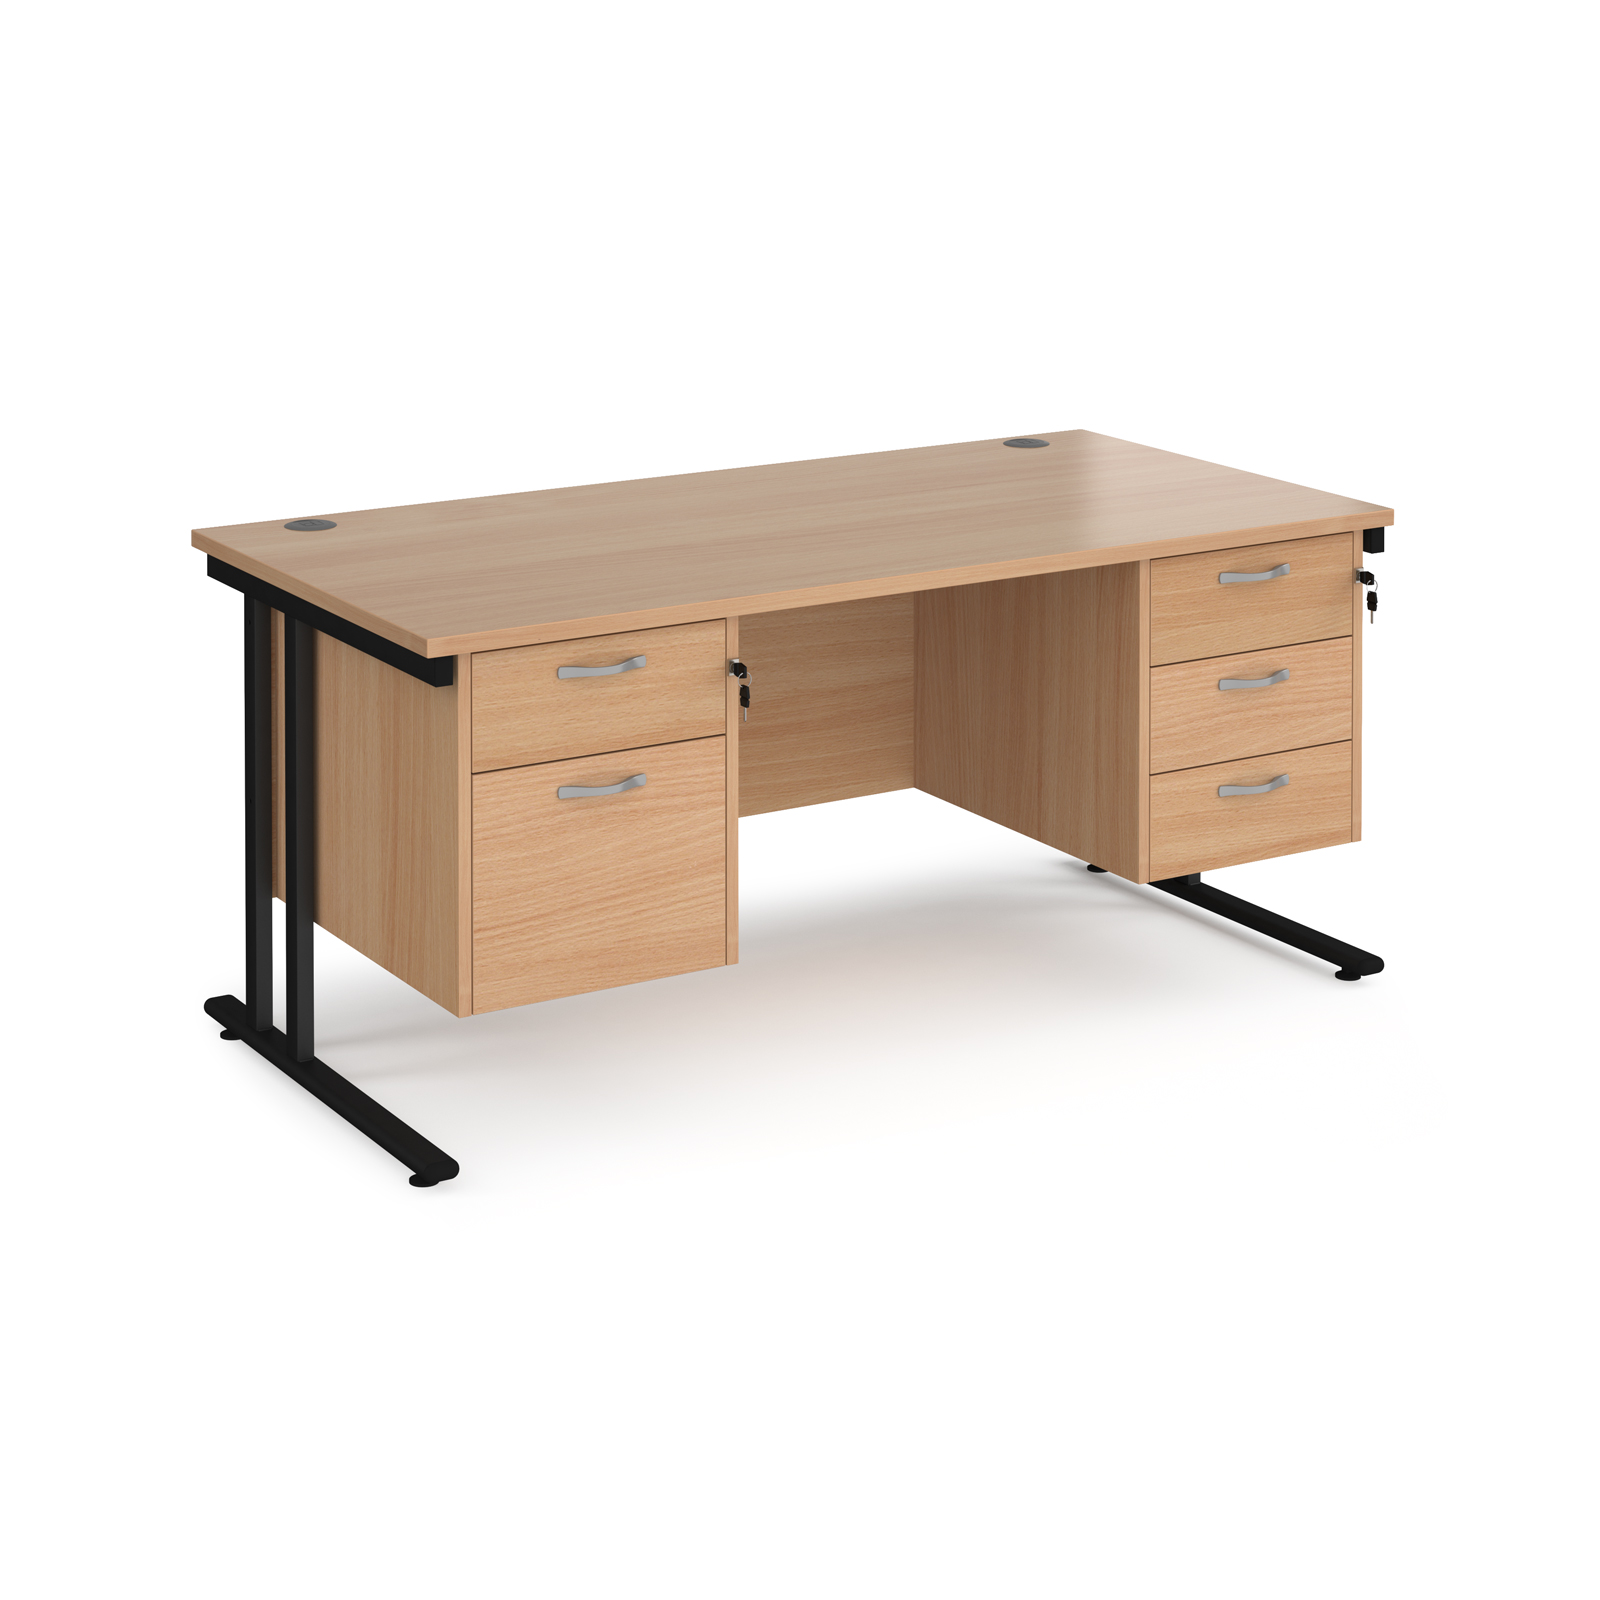 Maestro 25 straight desk 1600mm x 800mm with 2 and 3 drawer pedestals - black cantilever leg frame, beech top